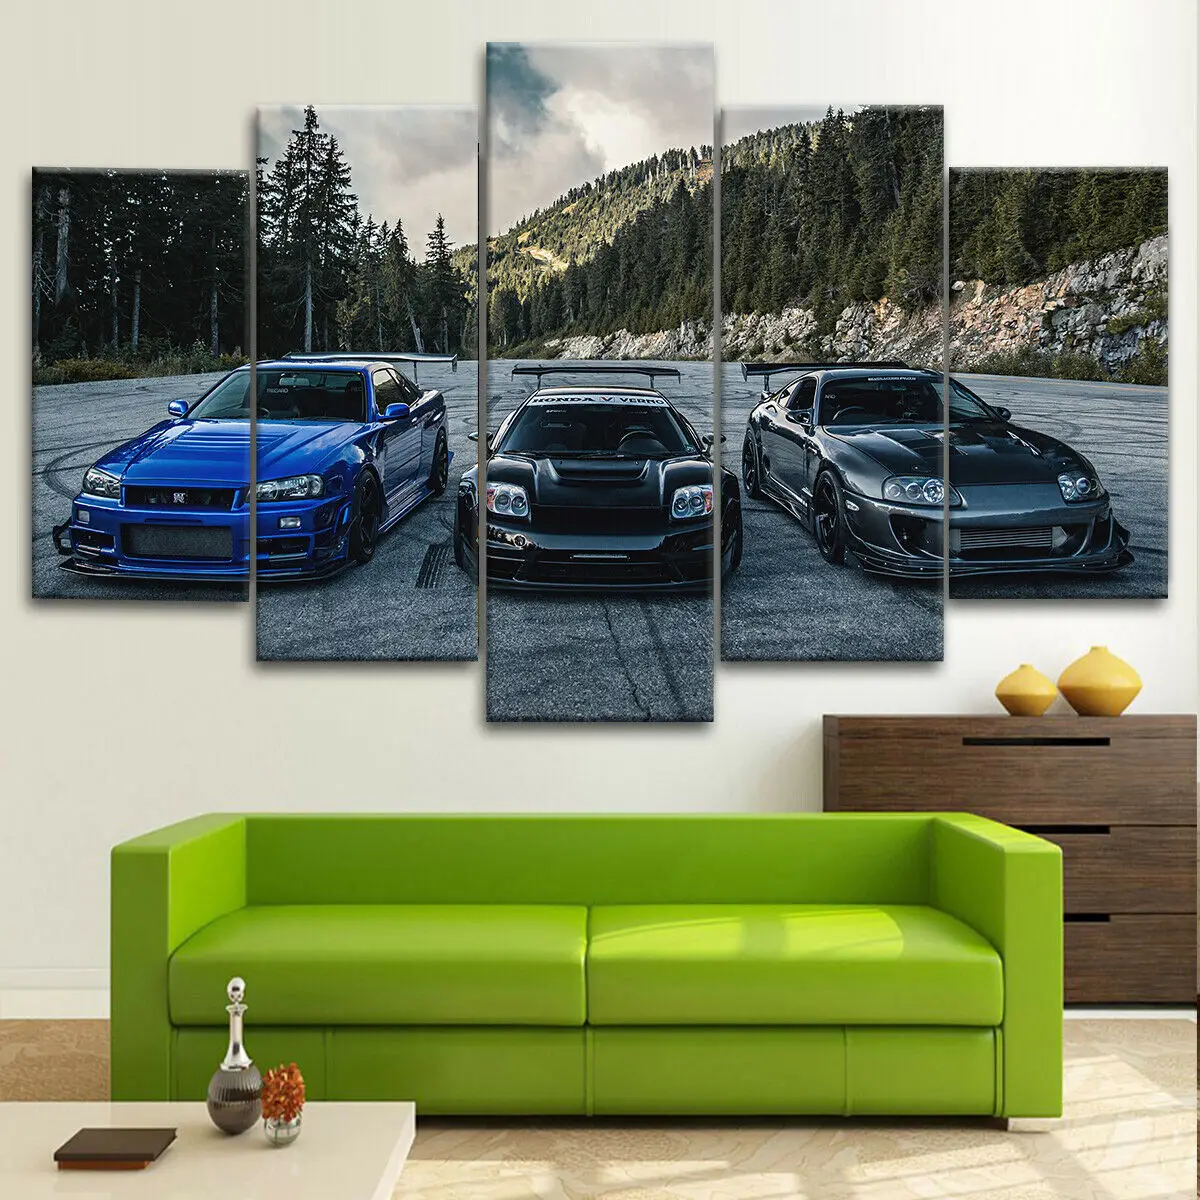 

No Framed Canvas 5Pcs JDM Supra Nissan Skyline NSX Car Wall Art Posters Home Decor Accessories Living Room Decoration Paintings